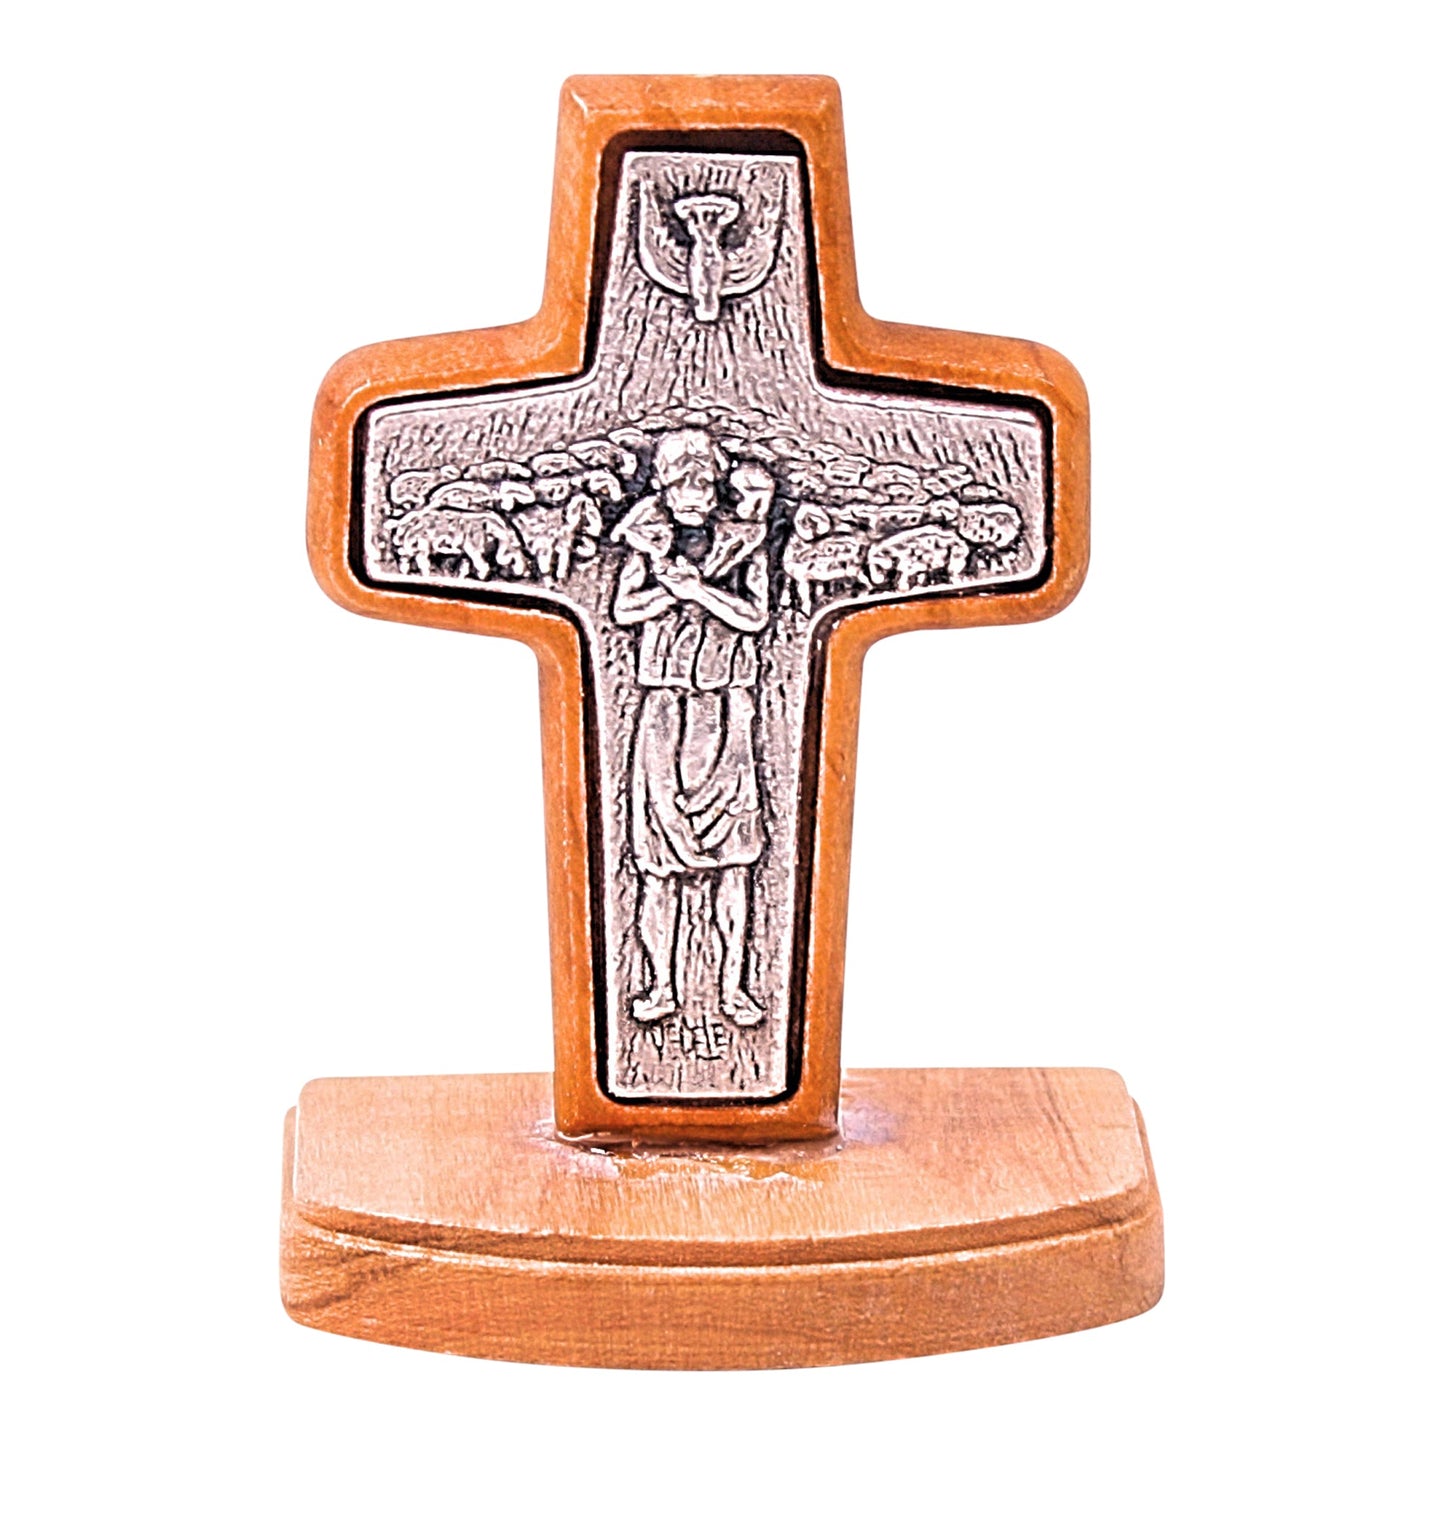 The 'Shepherd's Embrace' Olive Wood Cross, a finely detailed carving of Jesus the Good Shepherd set within a polished olive wood frame on a matching stand, handcrafted by artisans in the Holy Land.